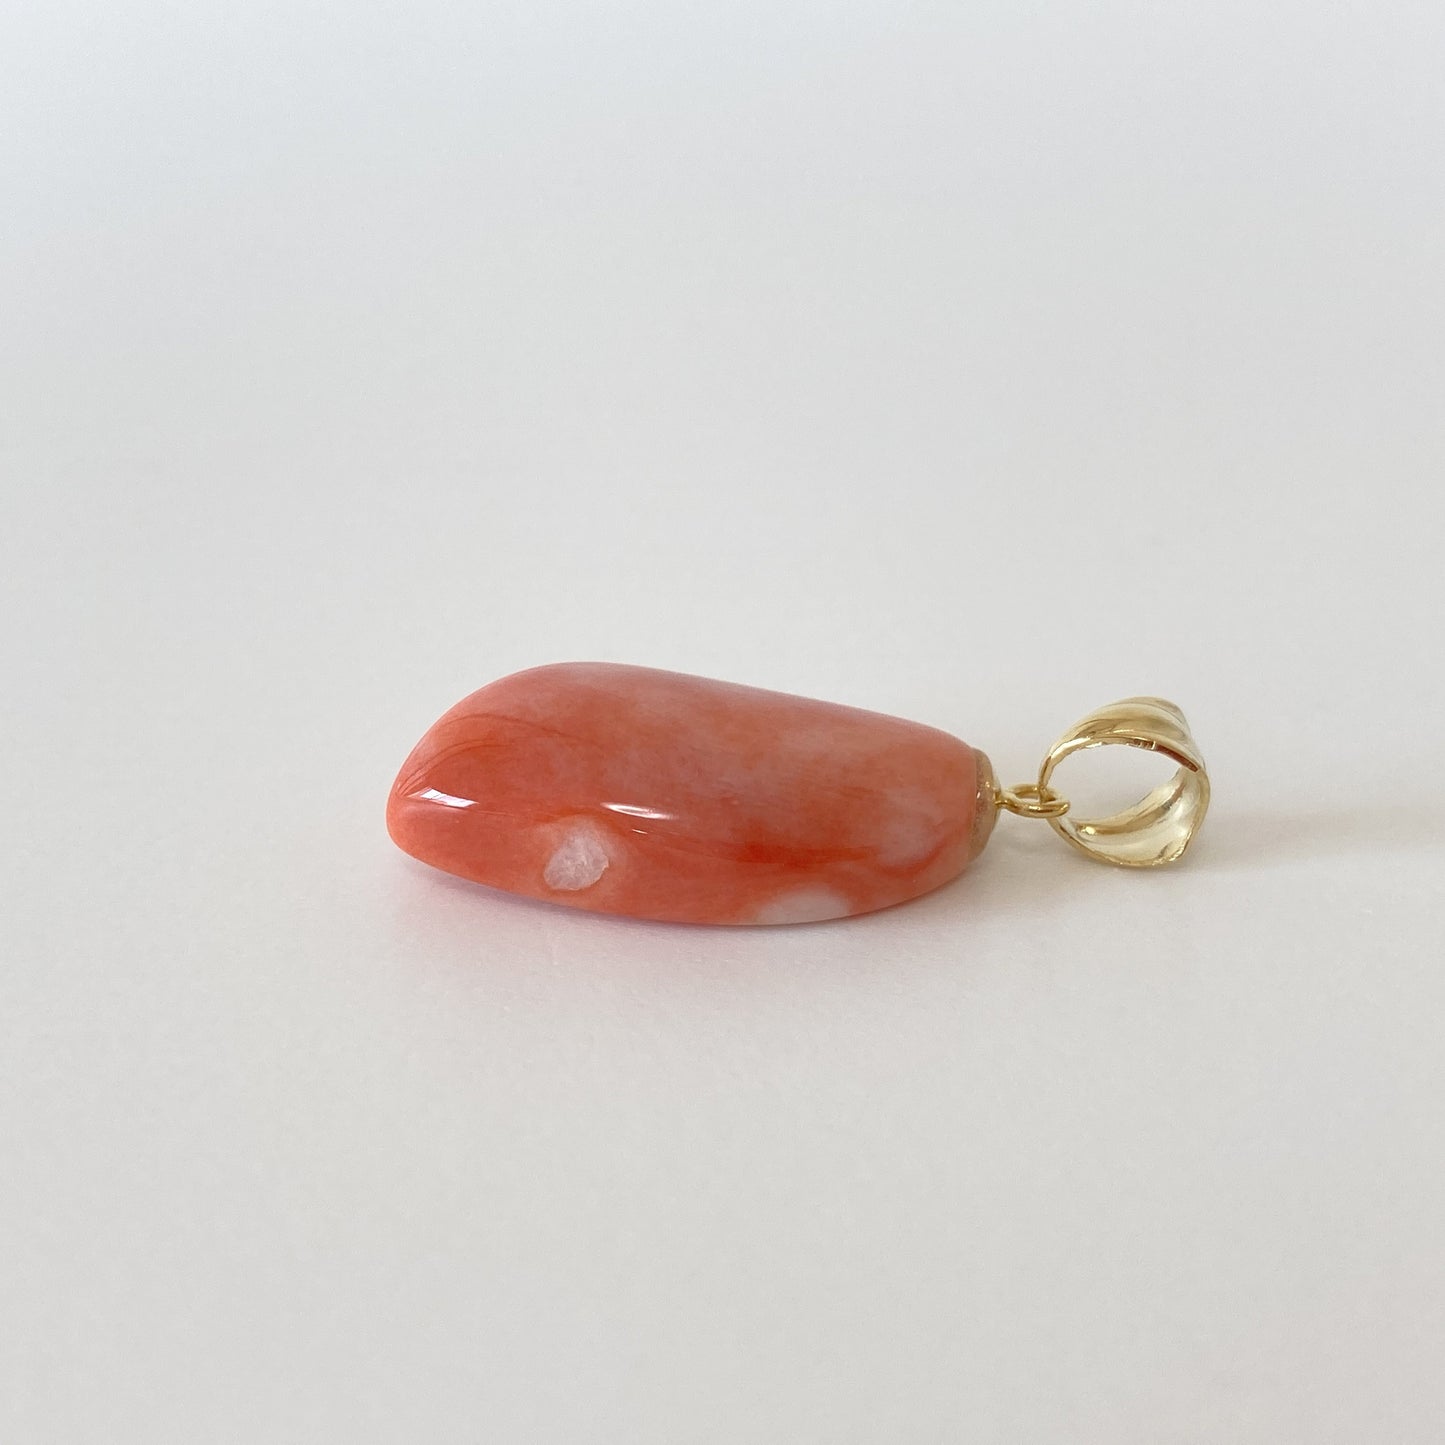 Natural Unique Shaped Japanese Momo Coral Pendant, Natural Orange Color Coral, Silver Bail (Gold-Plated)